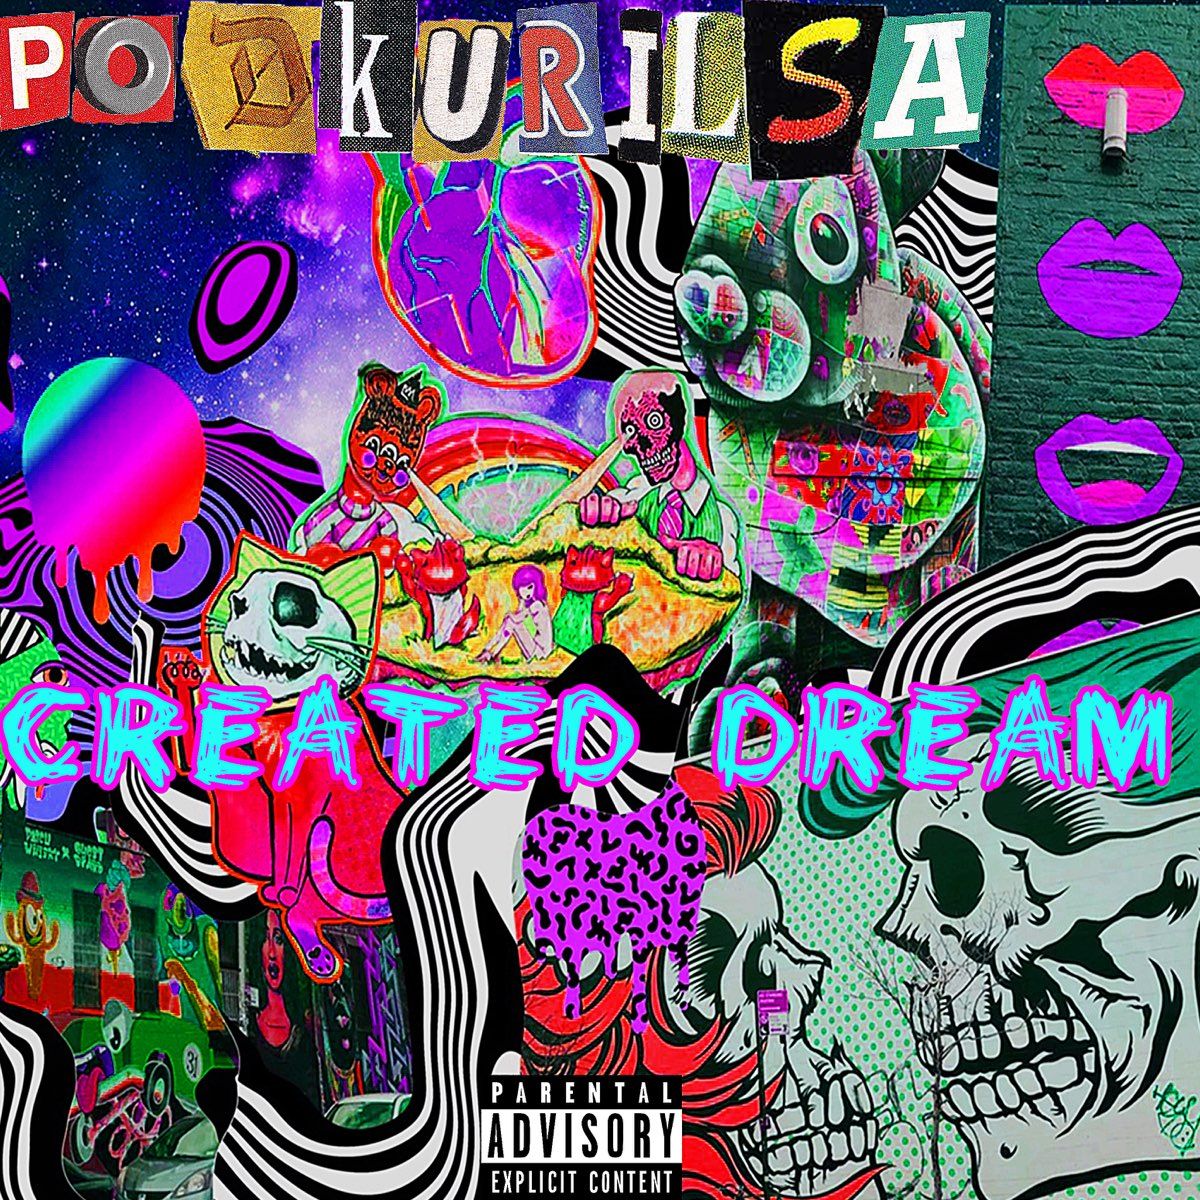 A colorful and abstract cover for the album 